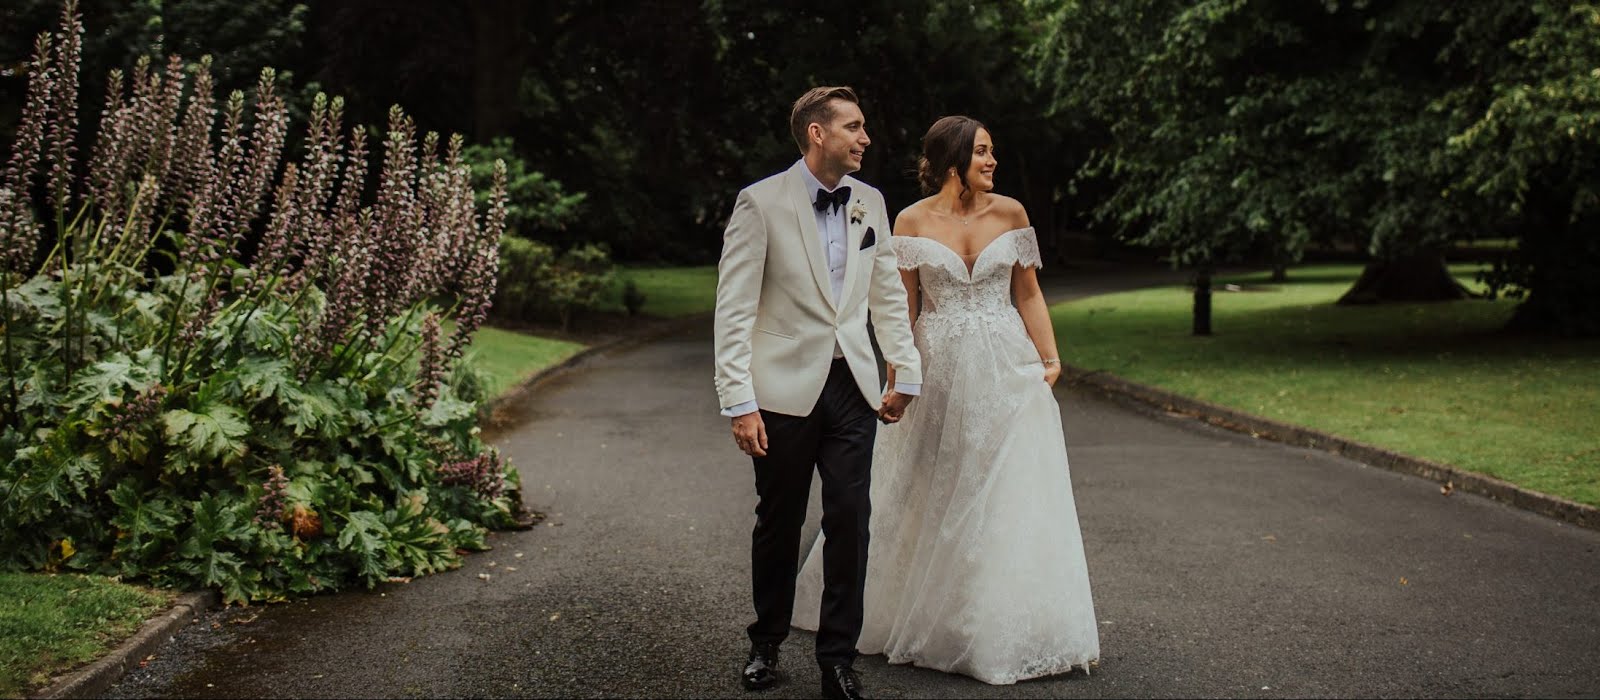 ‘We had our rescue dog Walter brought up for photos’: The small details that made this Irish couple’s wedding truly special